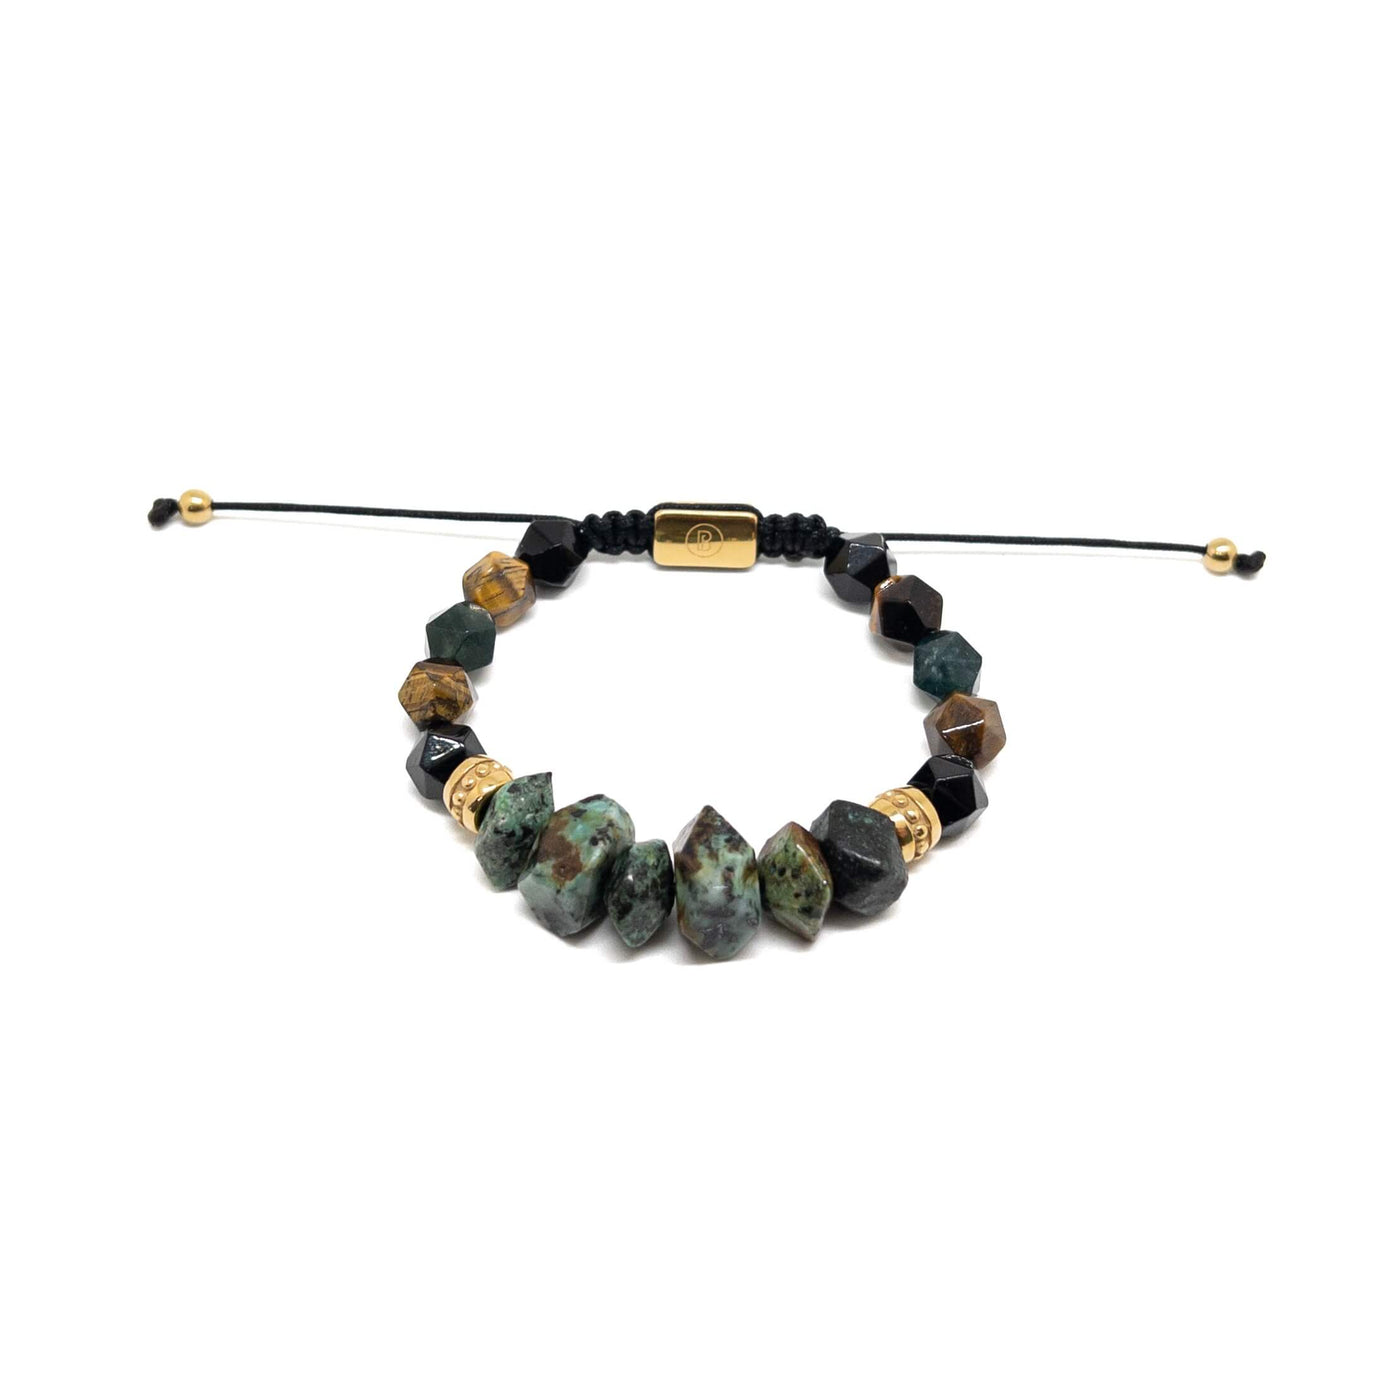 The Tiger eye and African Turquoise thread bracelet